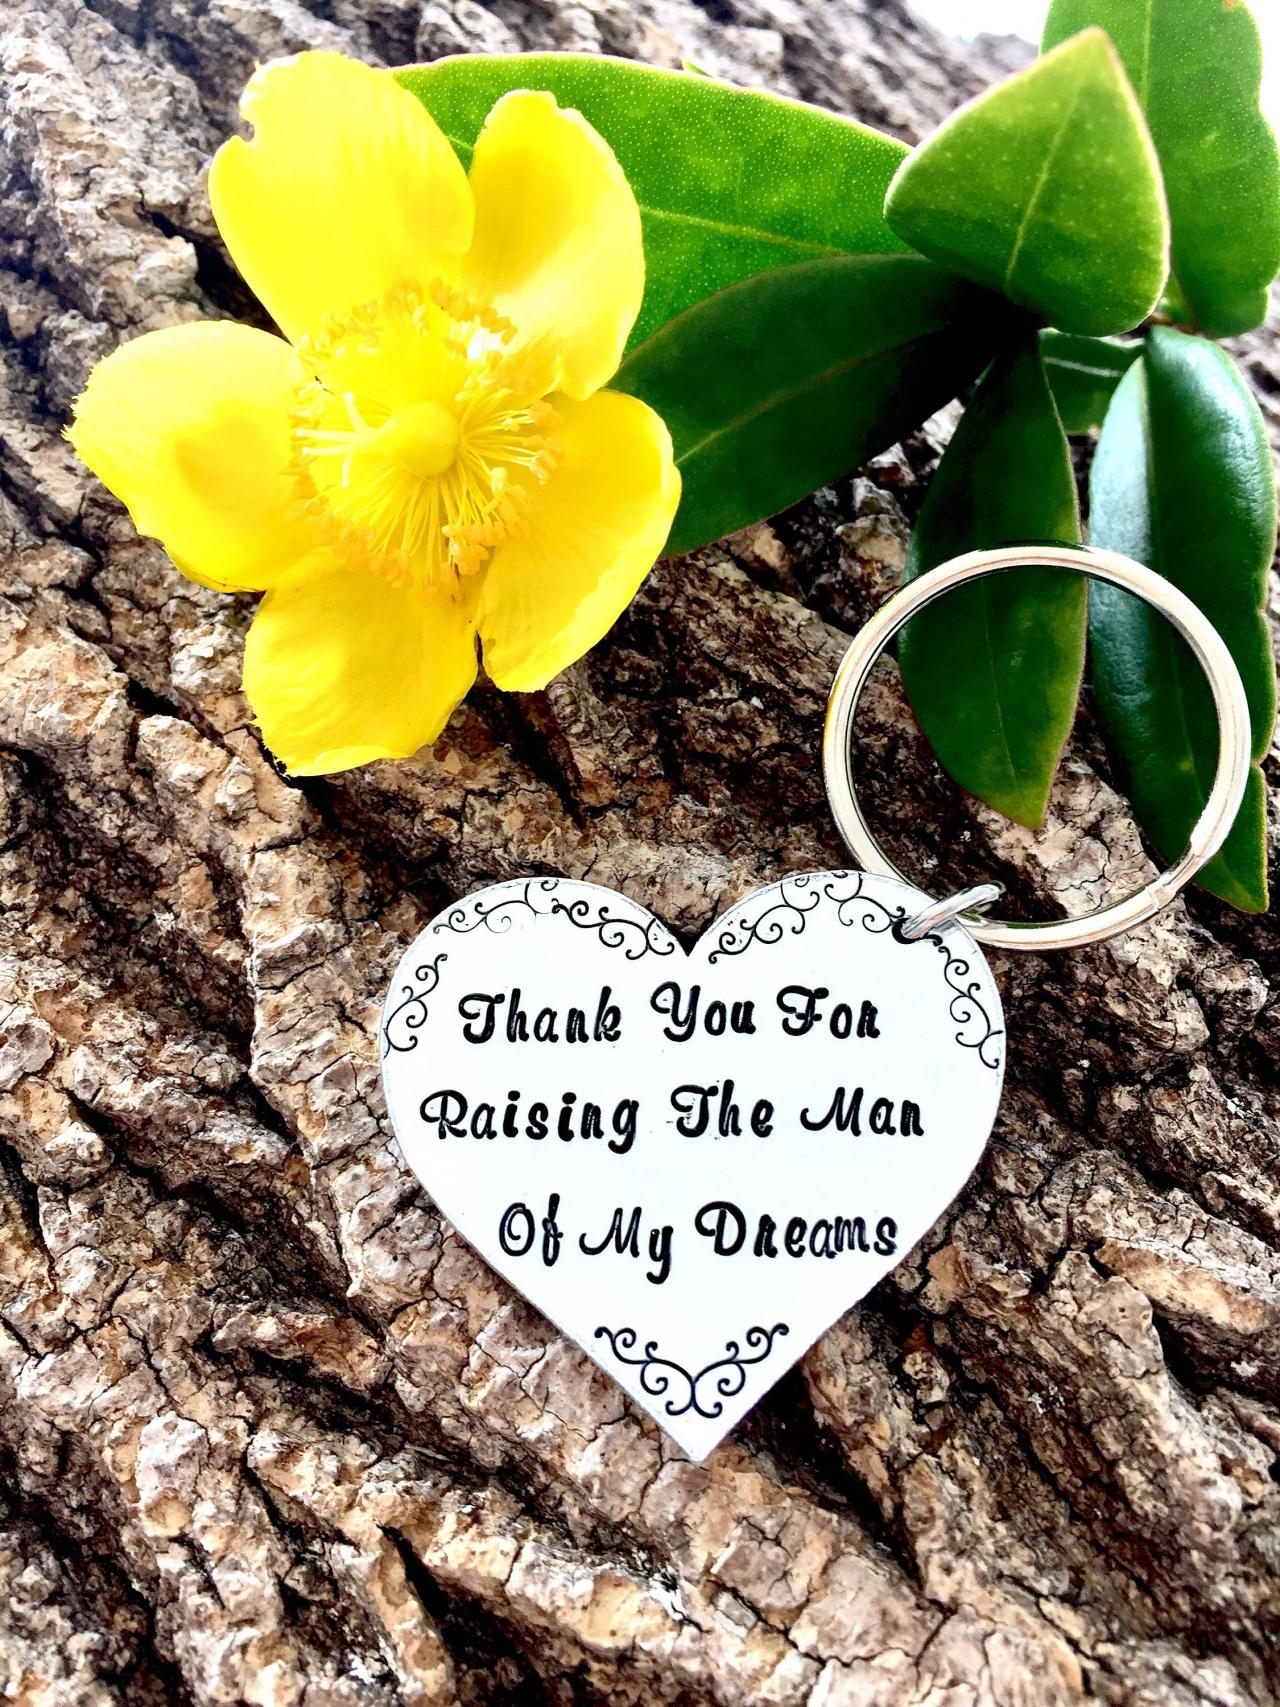 Thank You Gift, Mother Of The Groom, Mother In Law Gift, Wedding Party Gift, Wedding Gift, Gift For Her, Man Of My Dreams, Hand Stamped